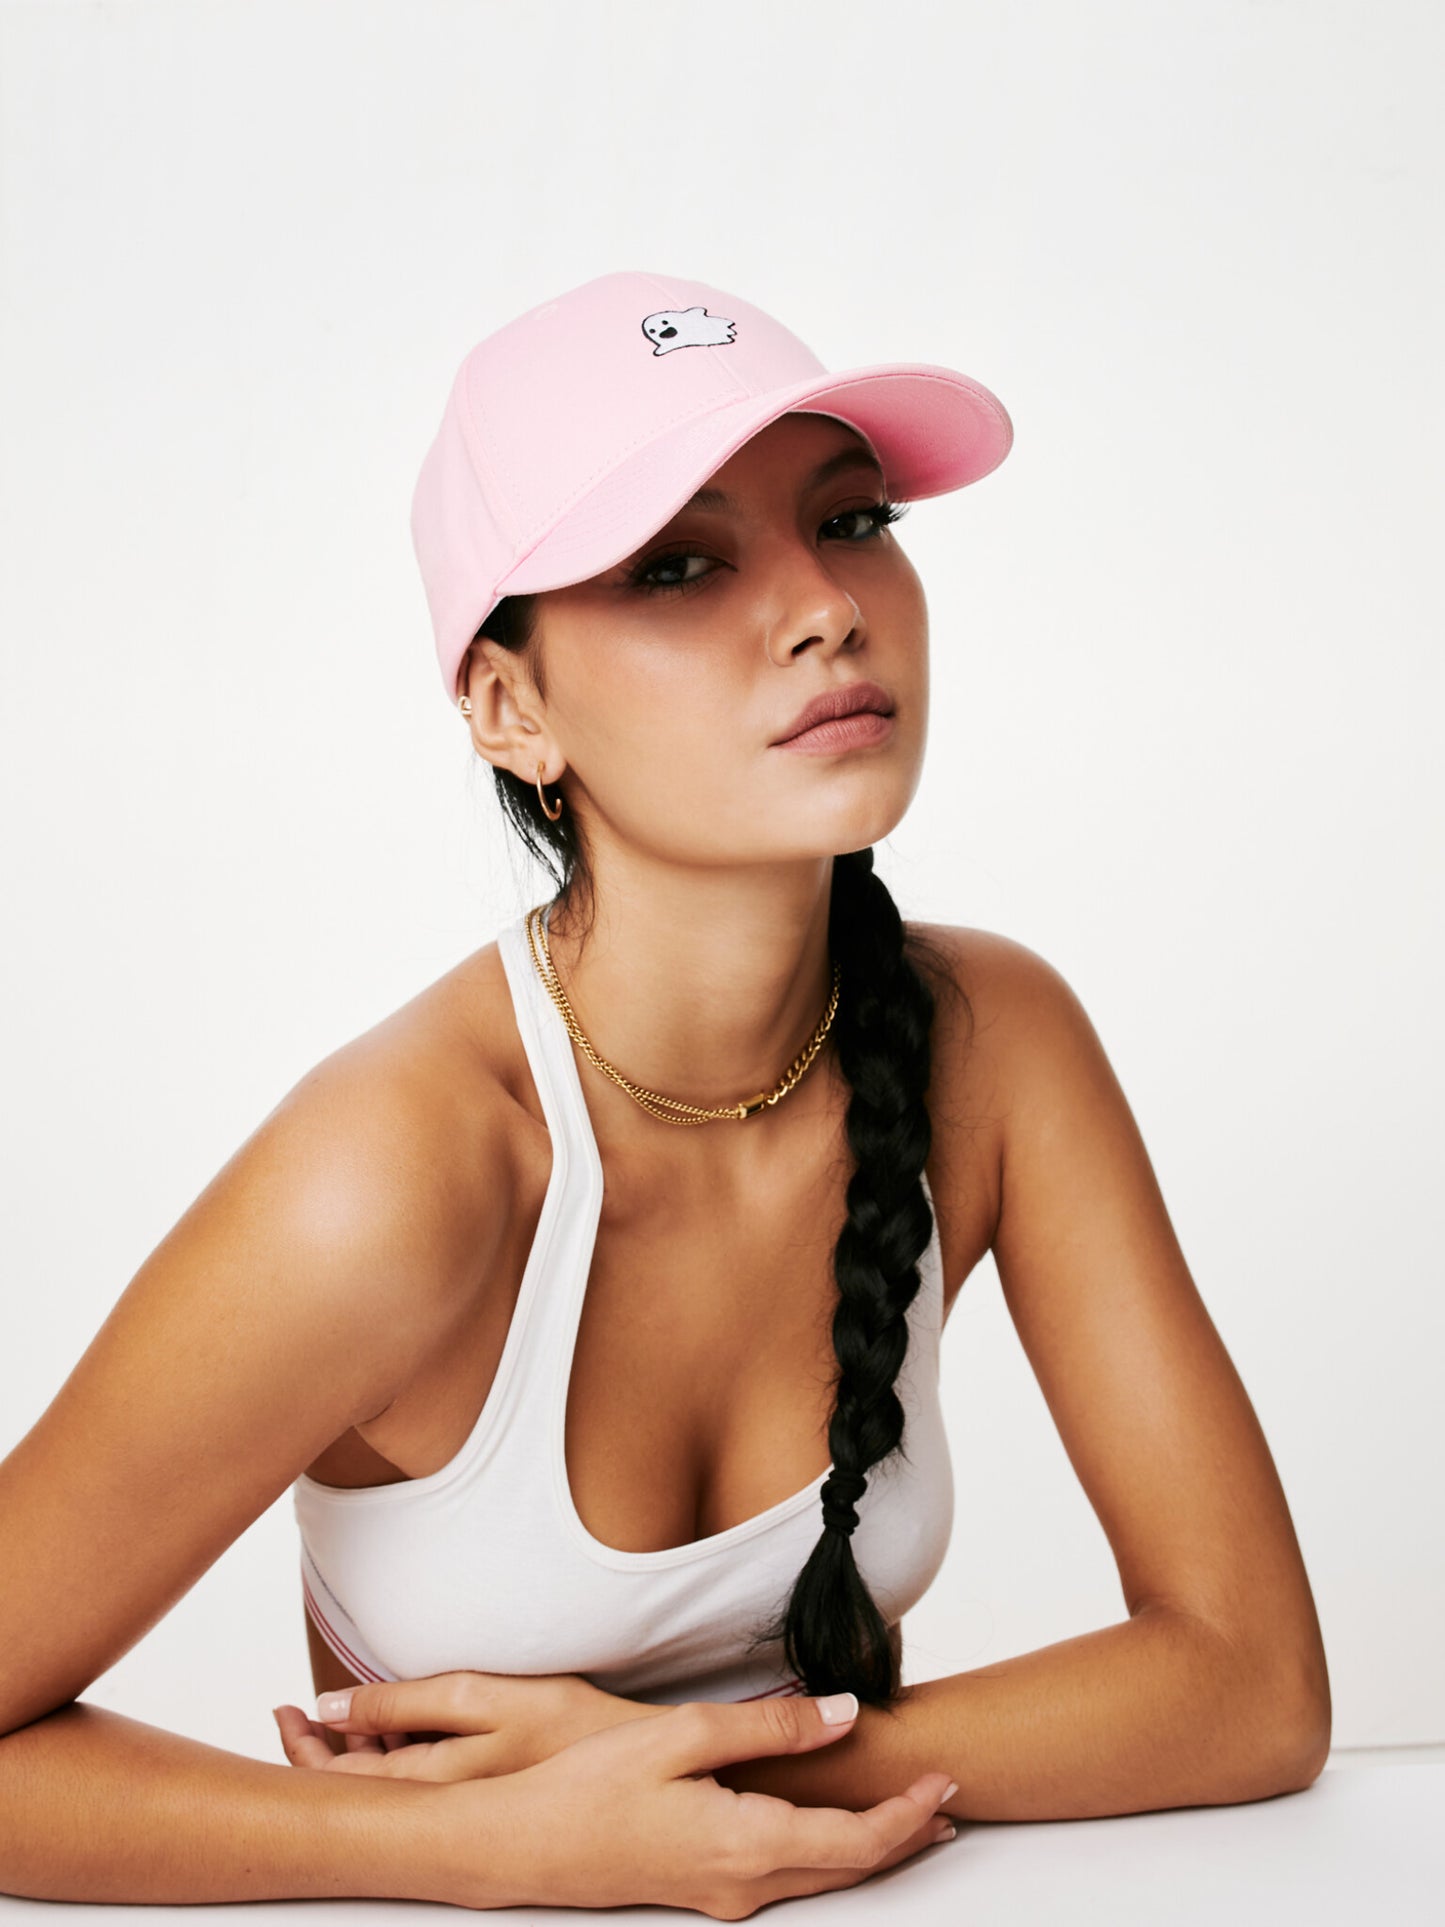 MOOD female model wearing Flying Ghost baseball cap in pink color looking stylish